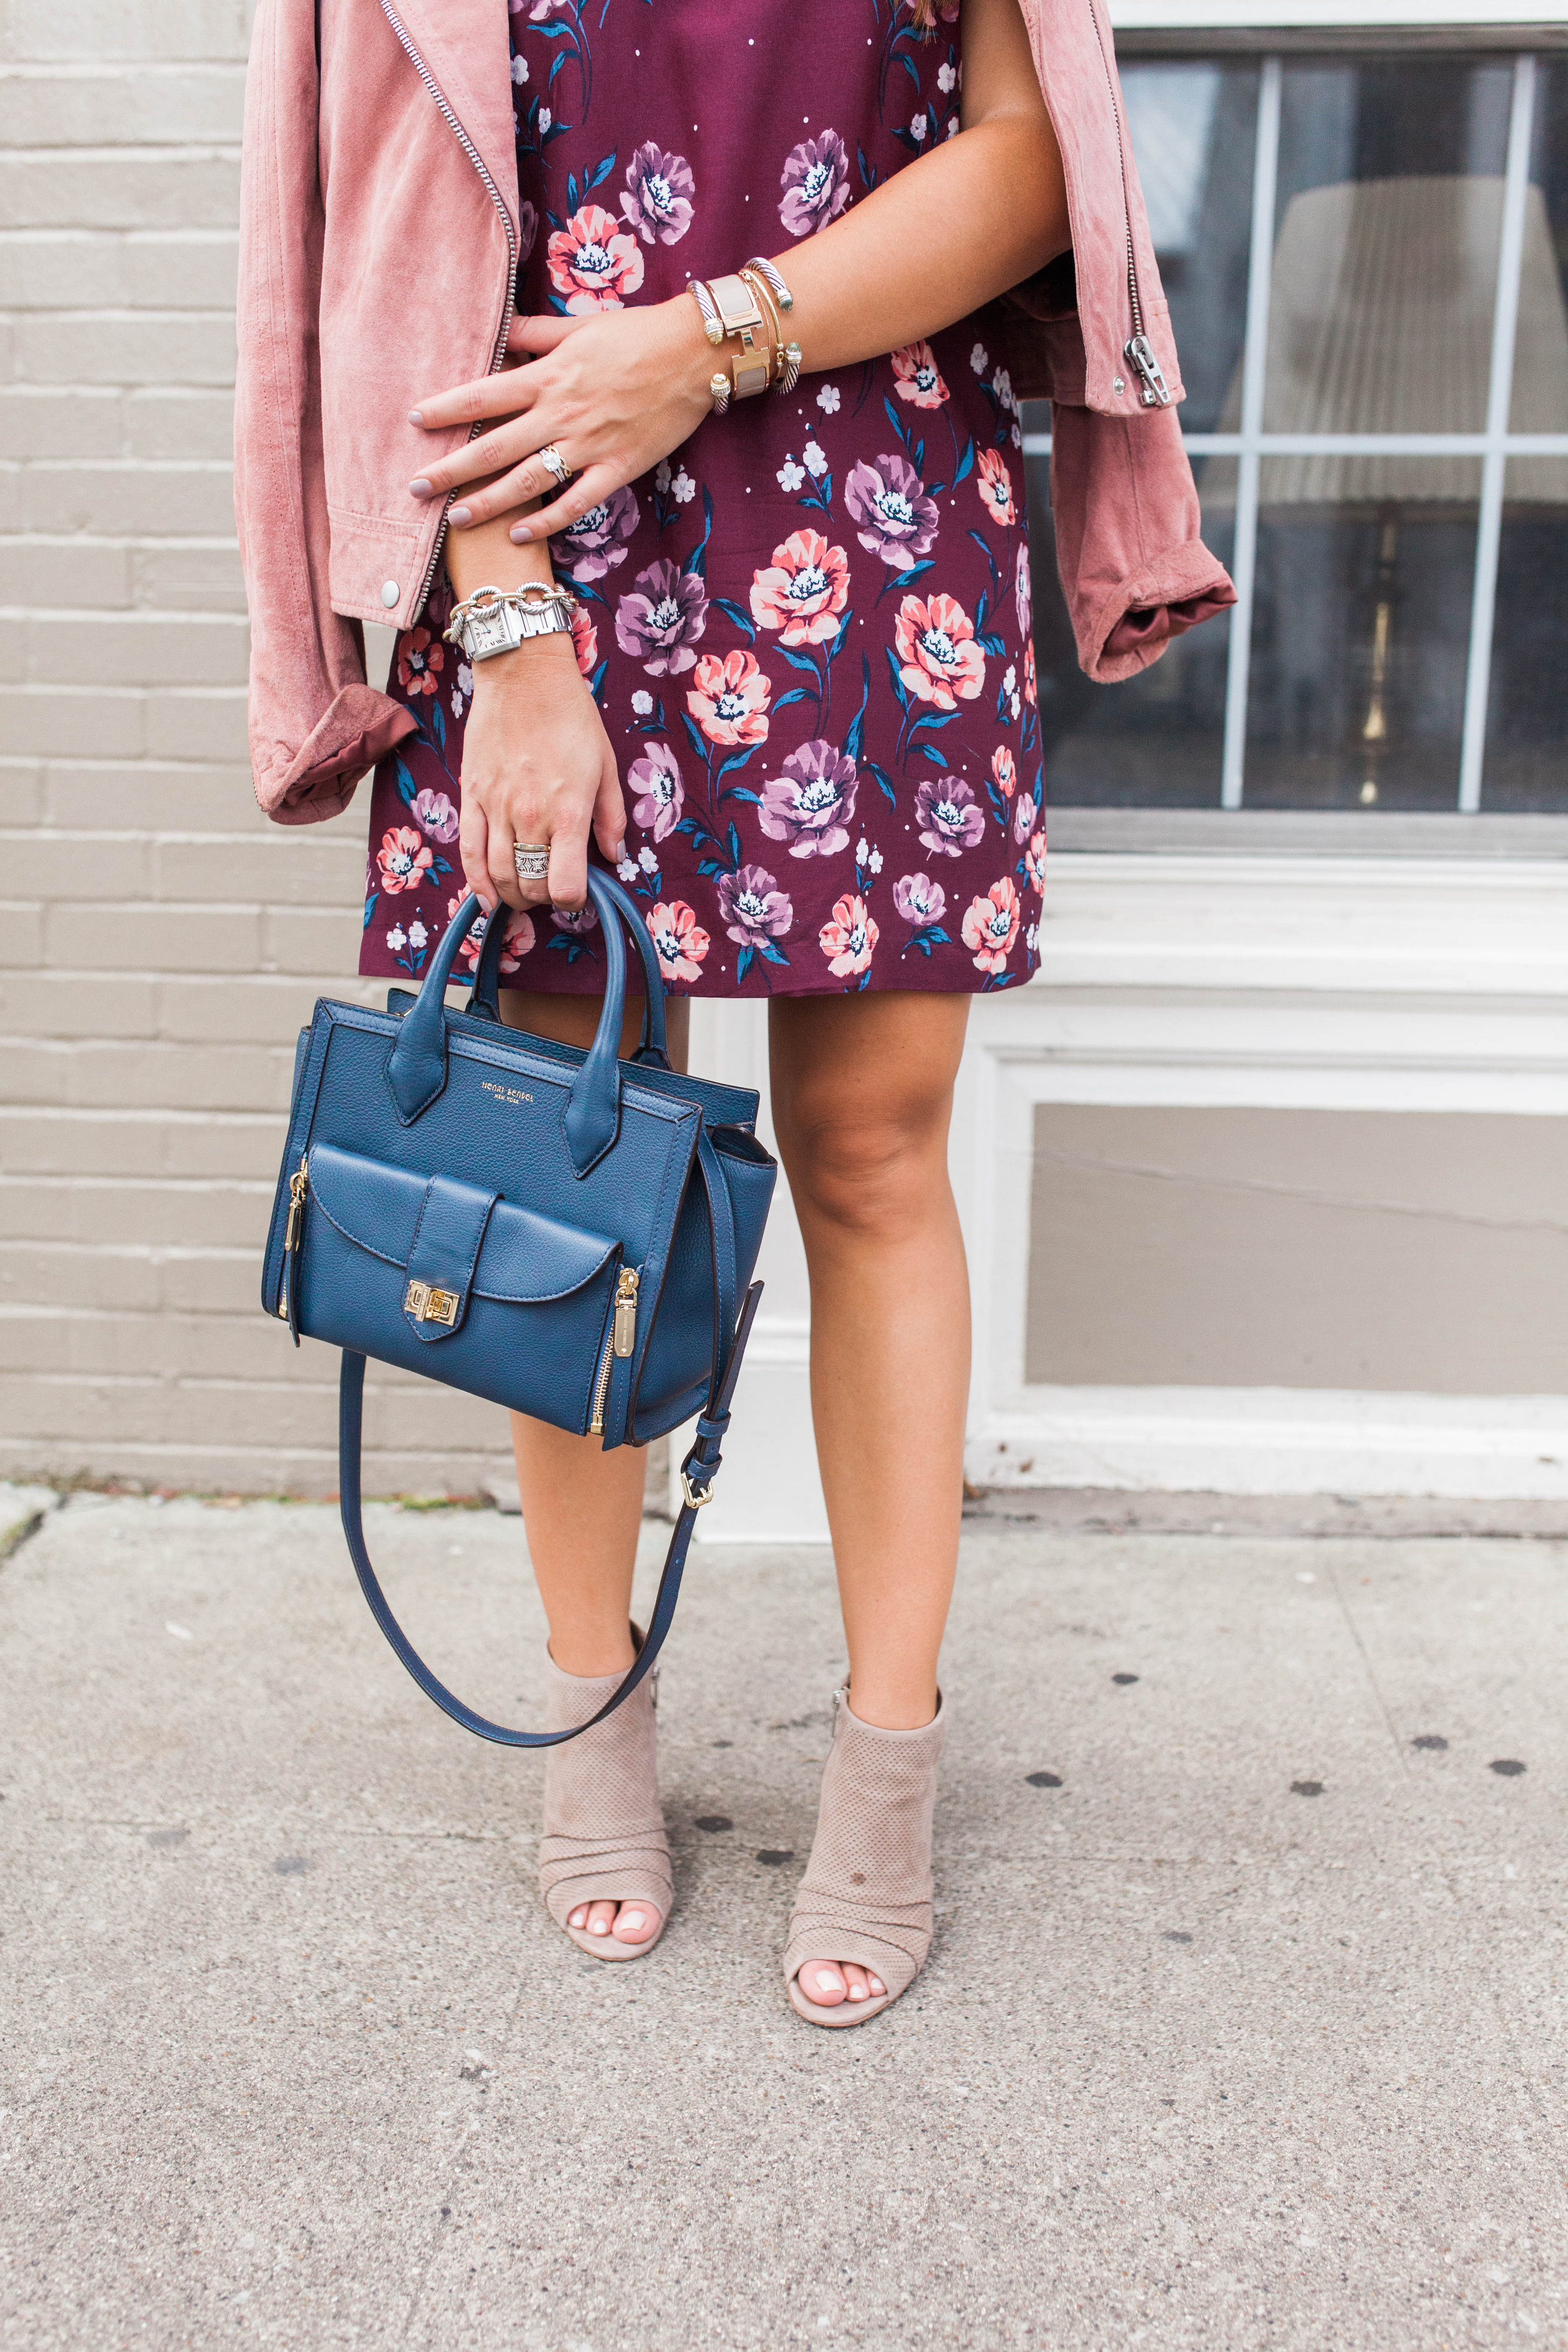 Fall floral dress / the one jacket you need this fall